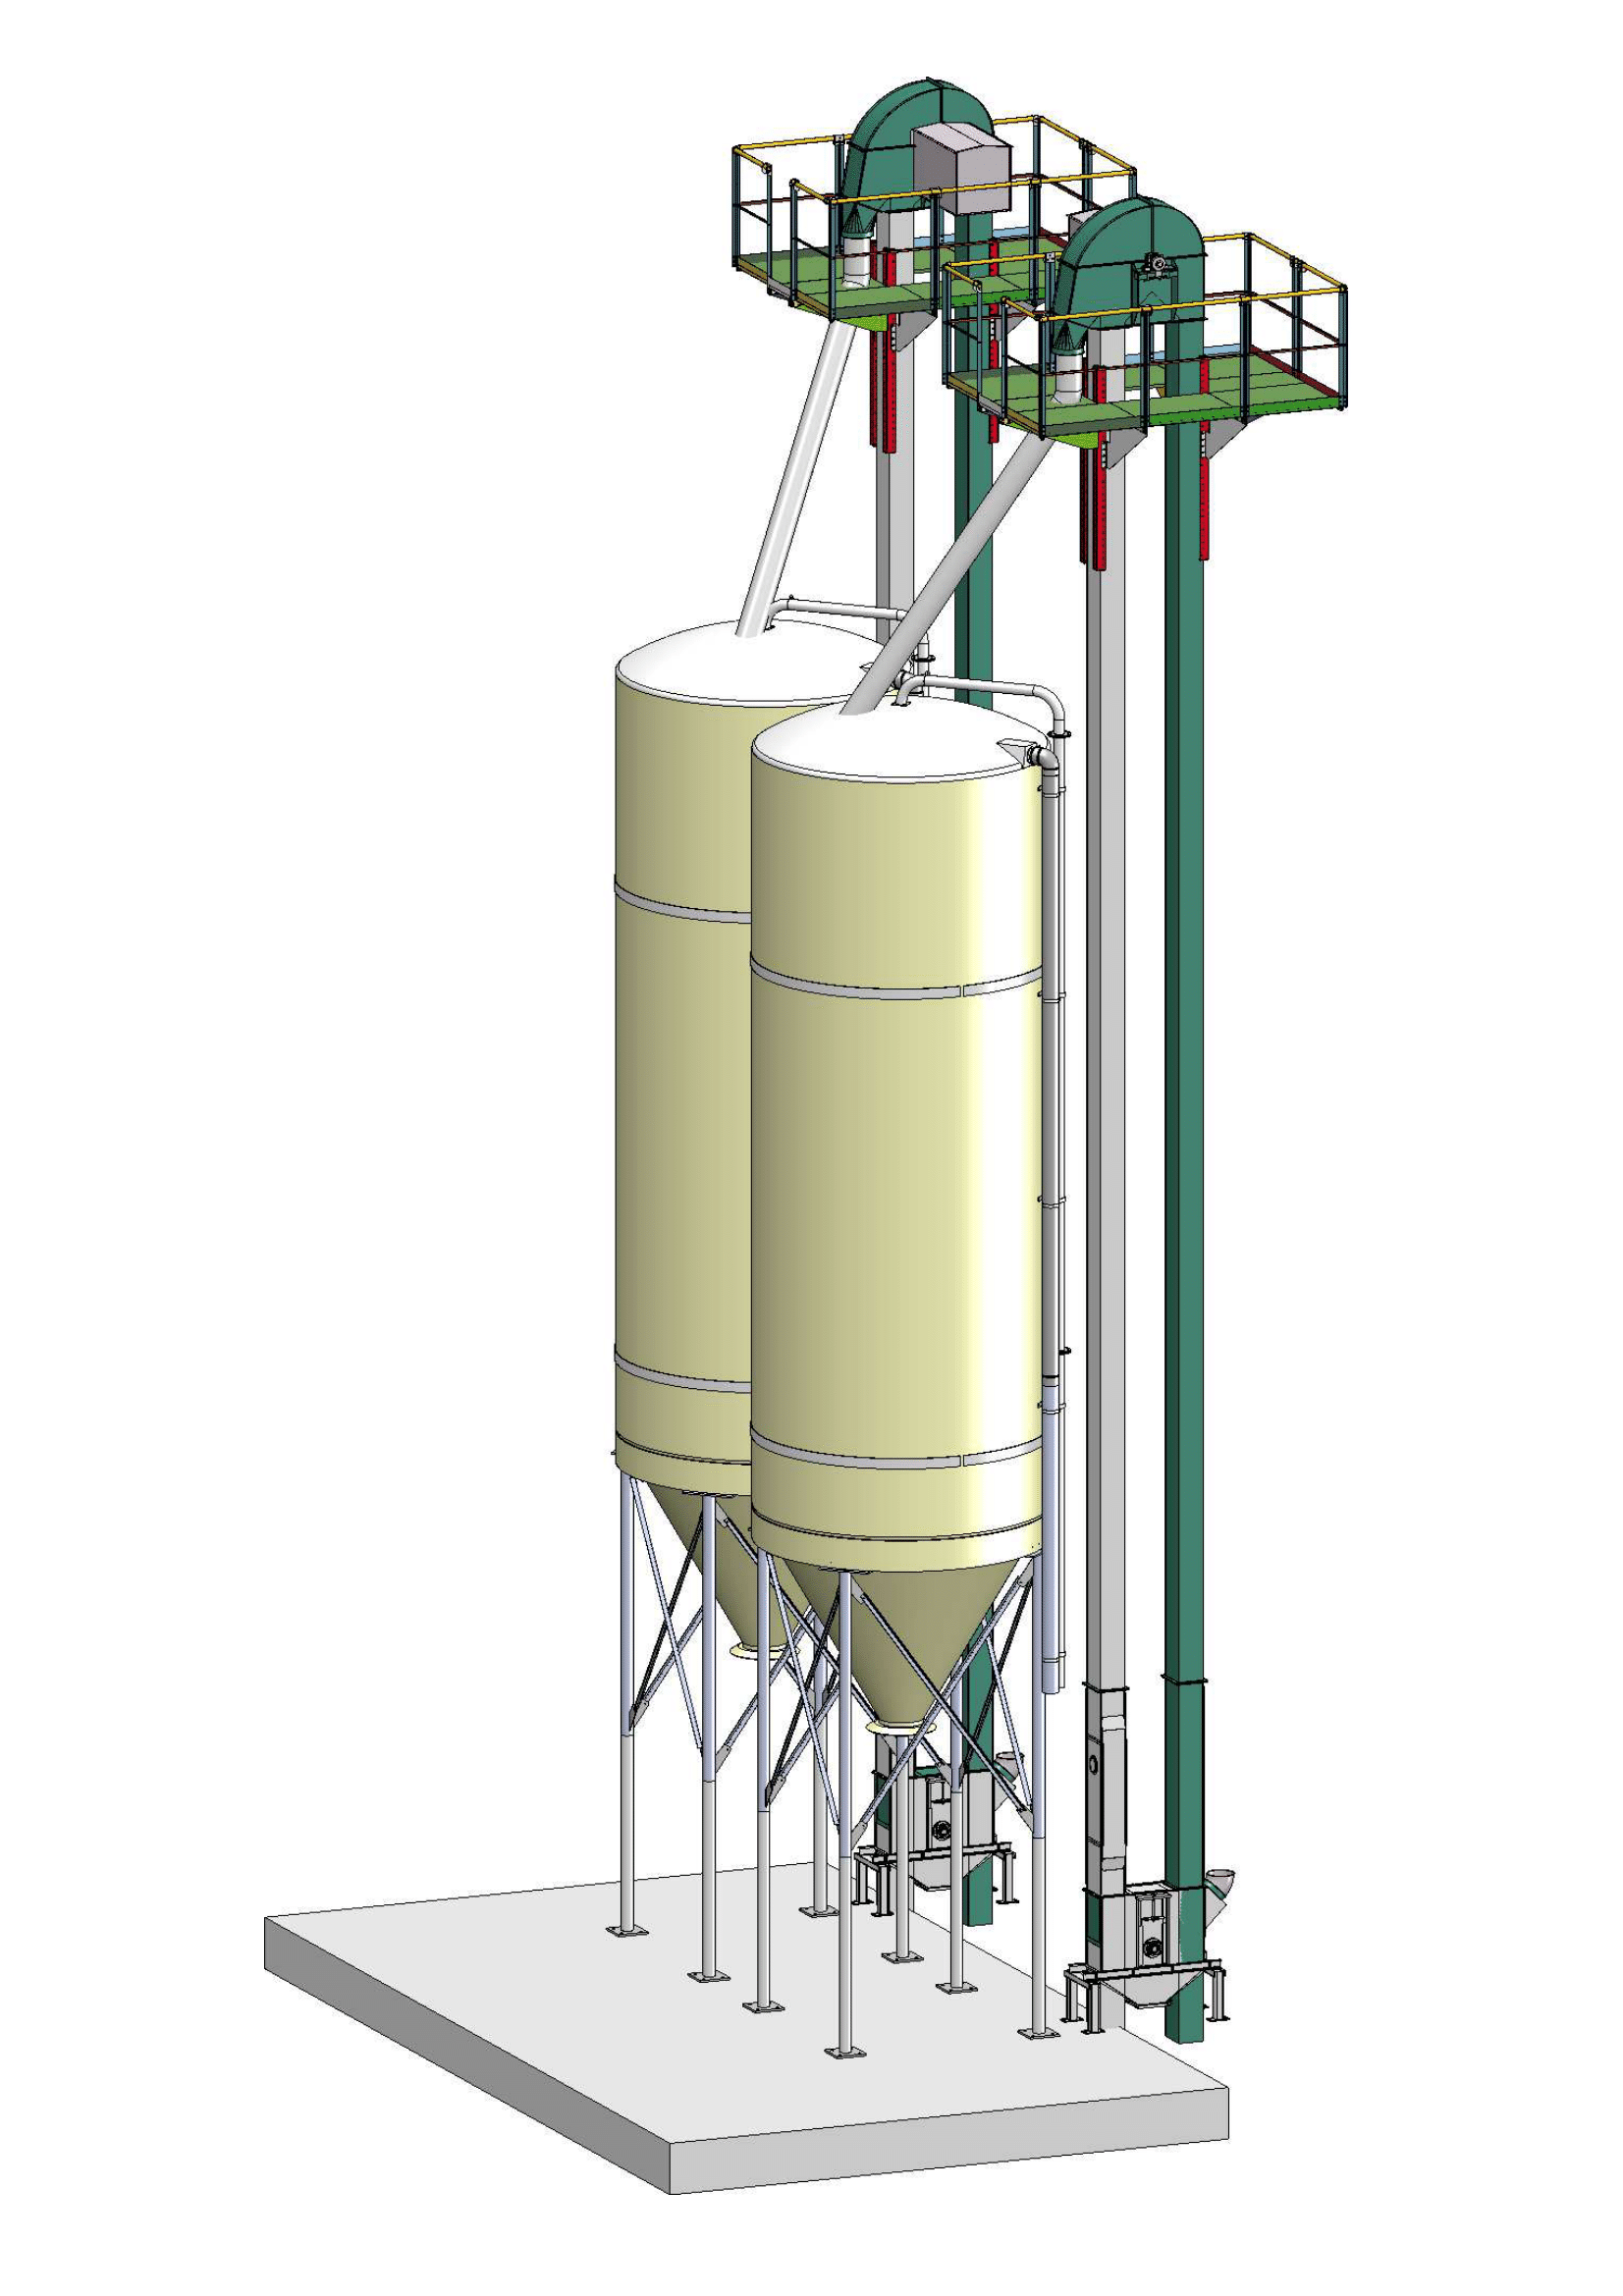 Complex plant with several bucket elevators and GRP silos as a complete plant concept.